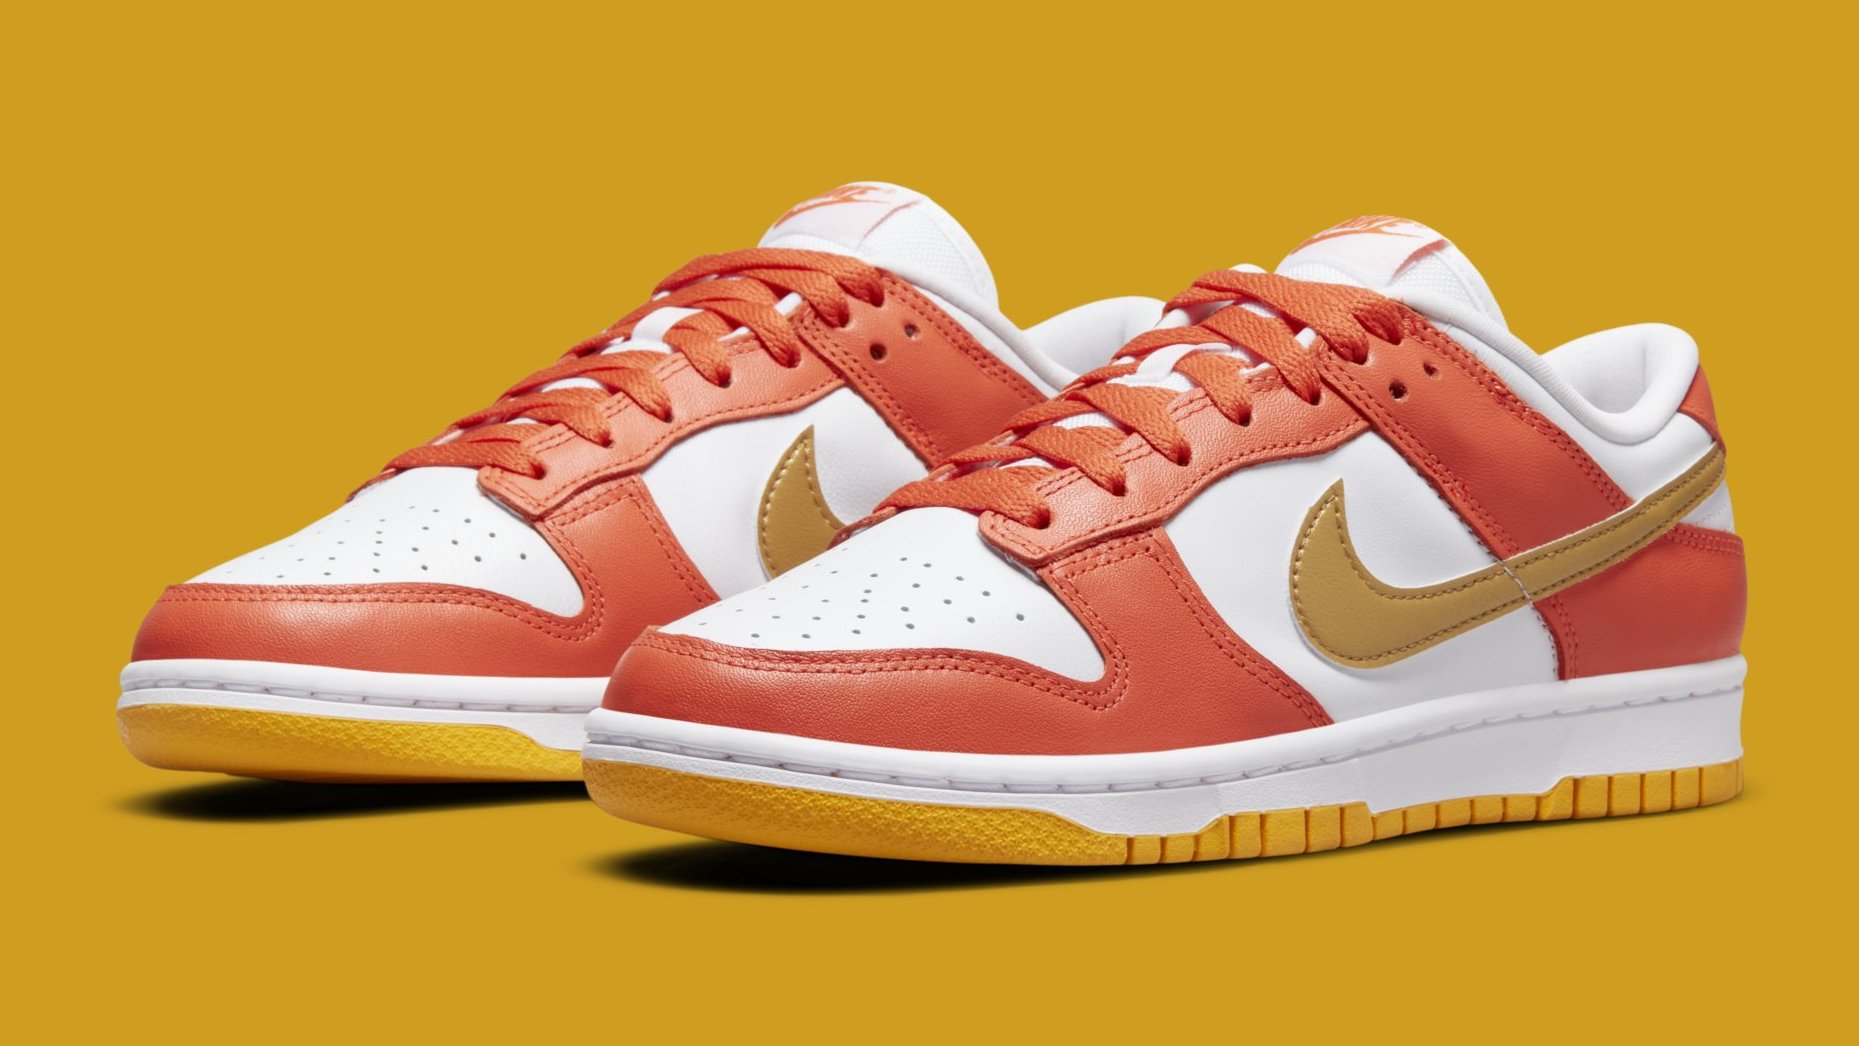 A Pair of 'University Gold' Nike Dunks Are Dropping Soon | Complex